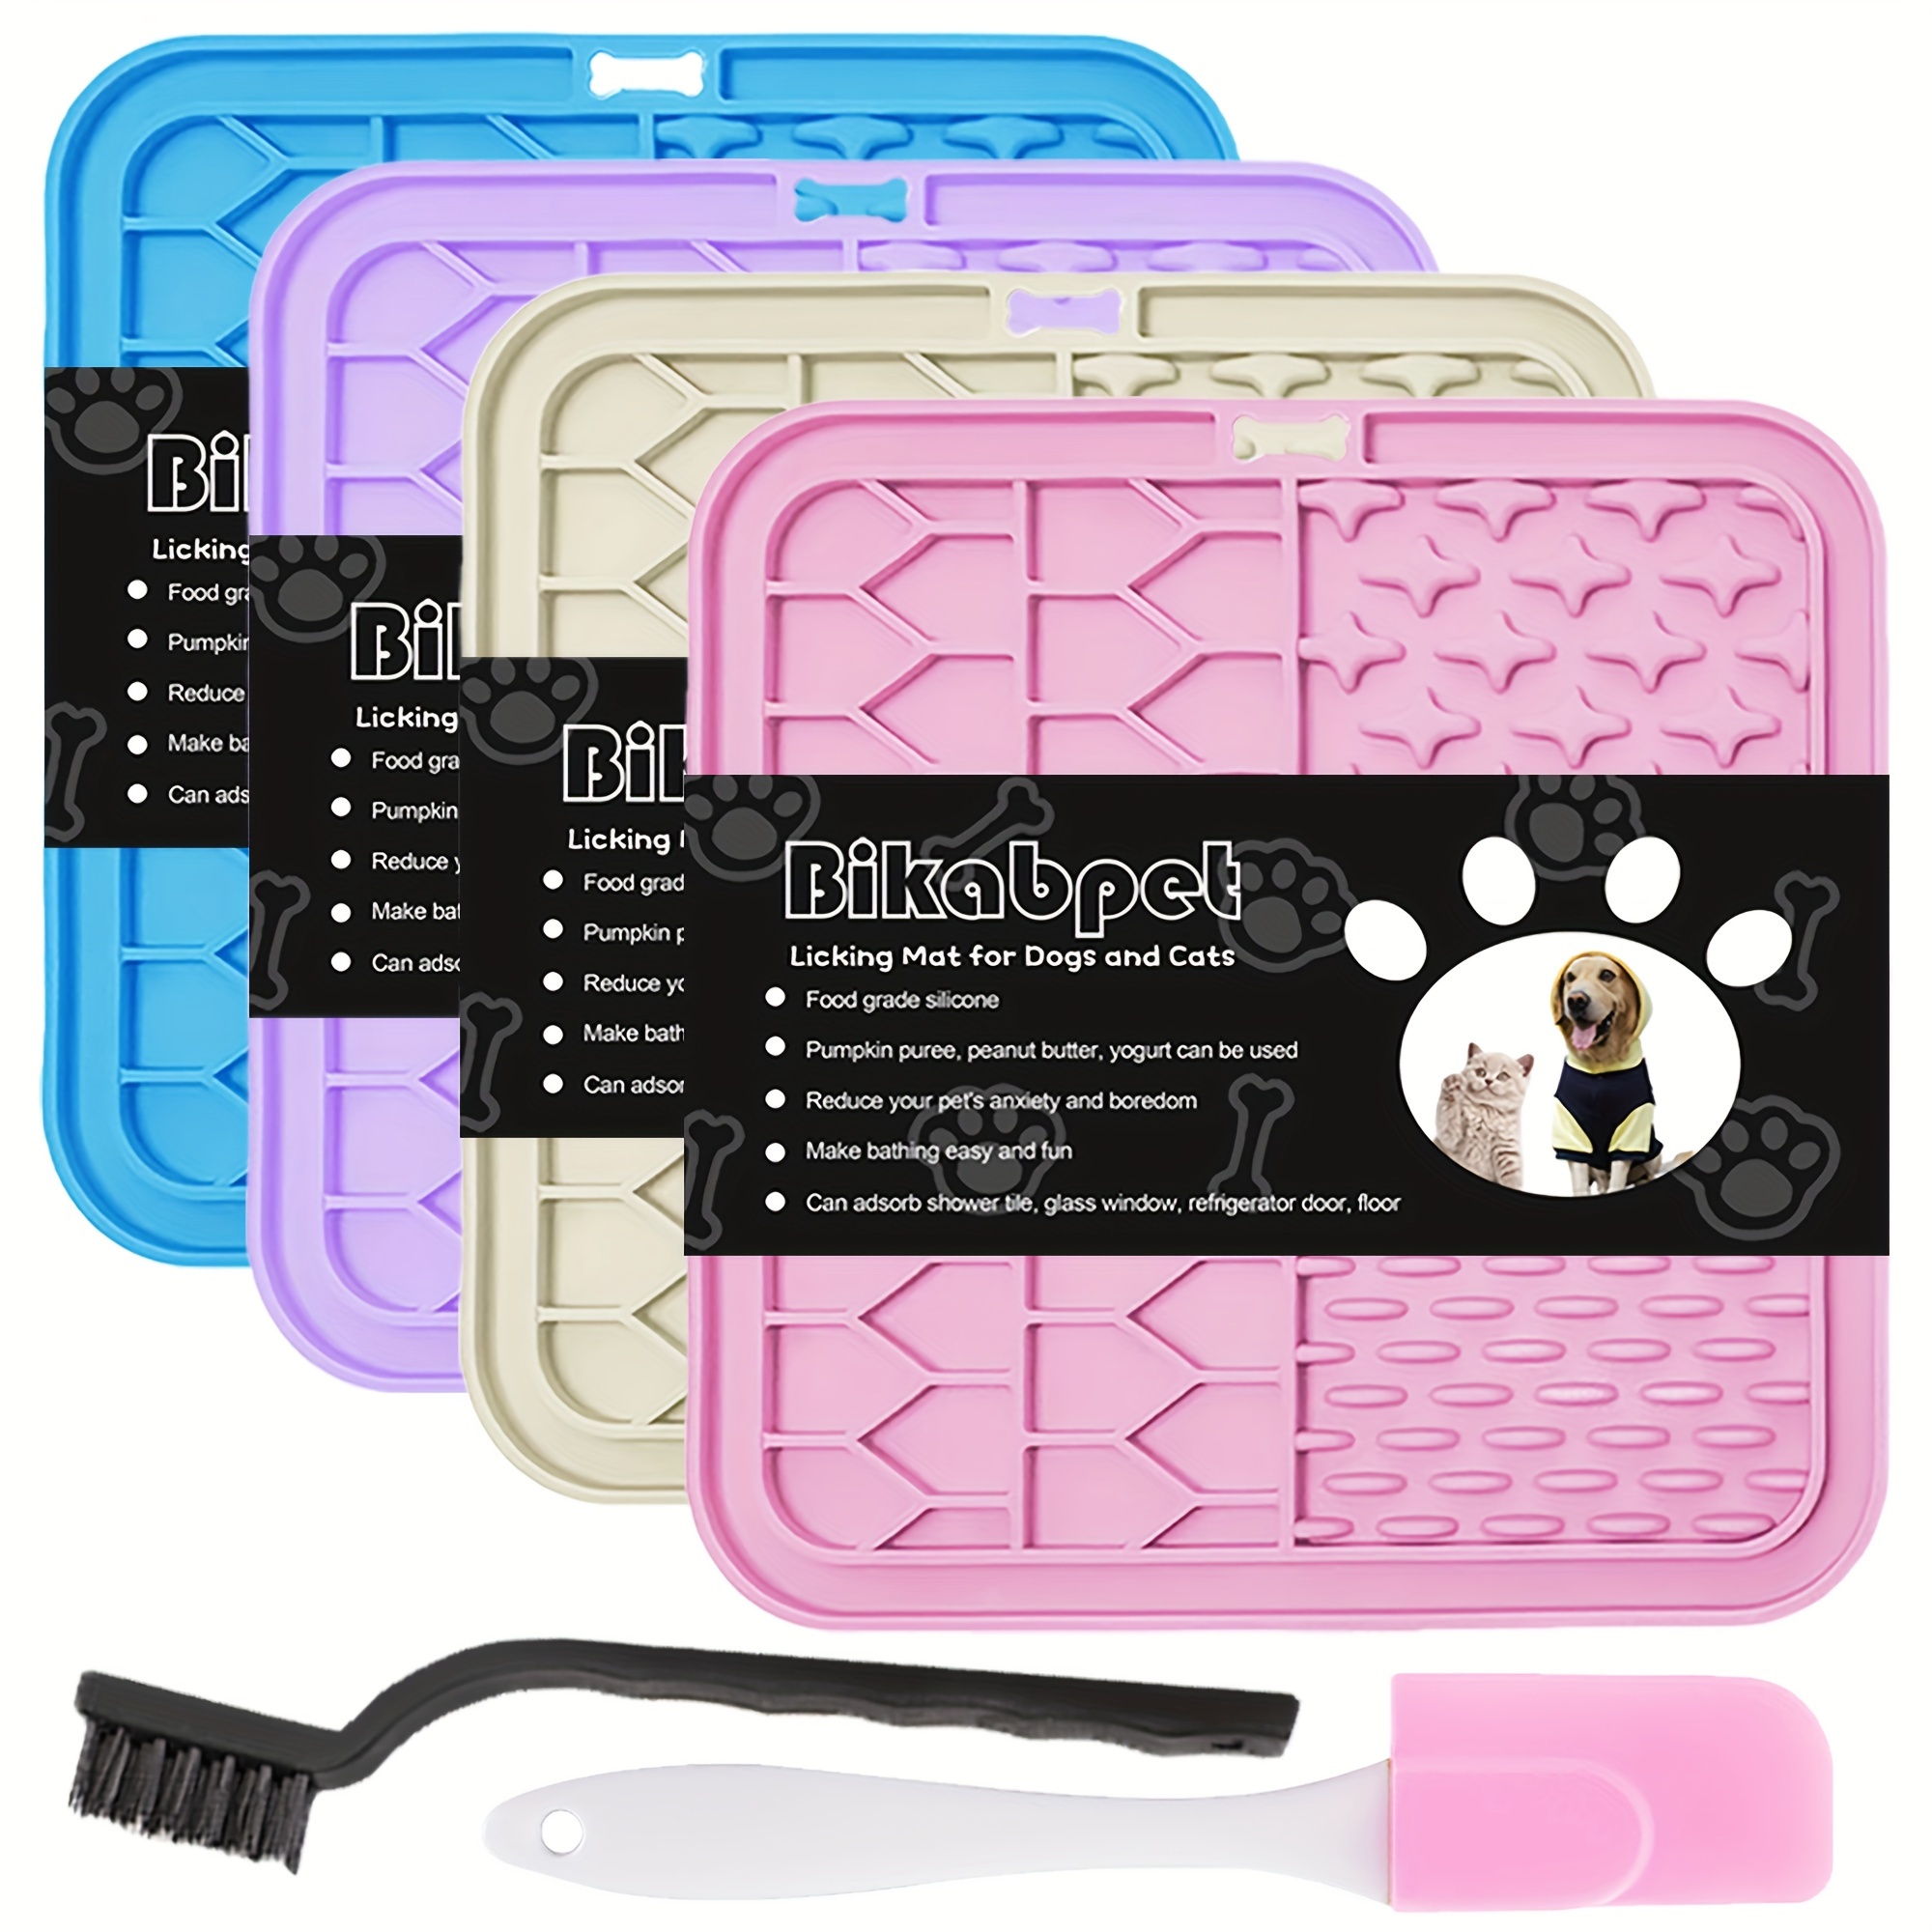 

4pcs Pet Dog Licking Mats, Silicone Dog Slow Food Plate Mat Anti-choking Feeder With Feeding Scraper And Washing Brush, Perfect For Bathing Grooming Distraction